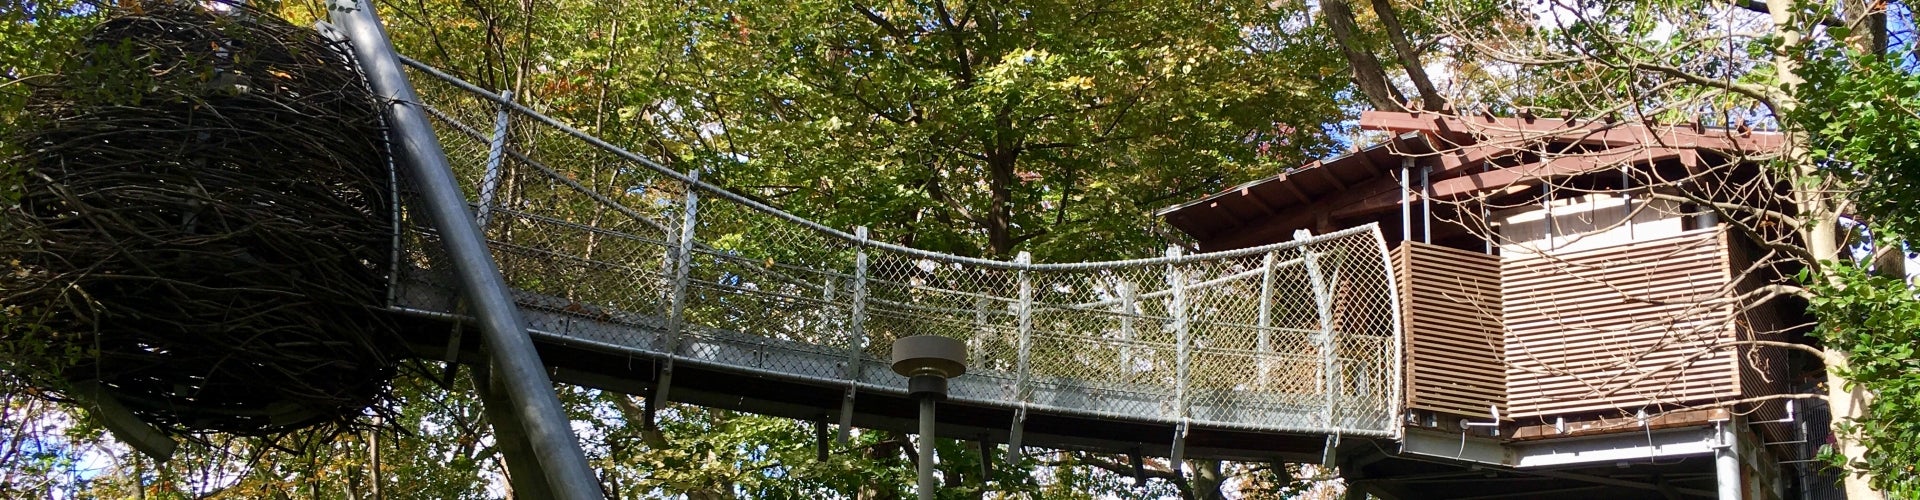 A wooden building in the trees is connected to an oversized birds nest by a metal bridge. 